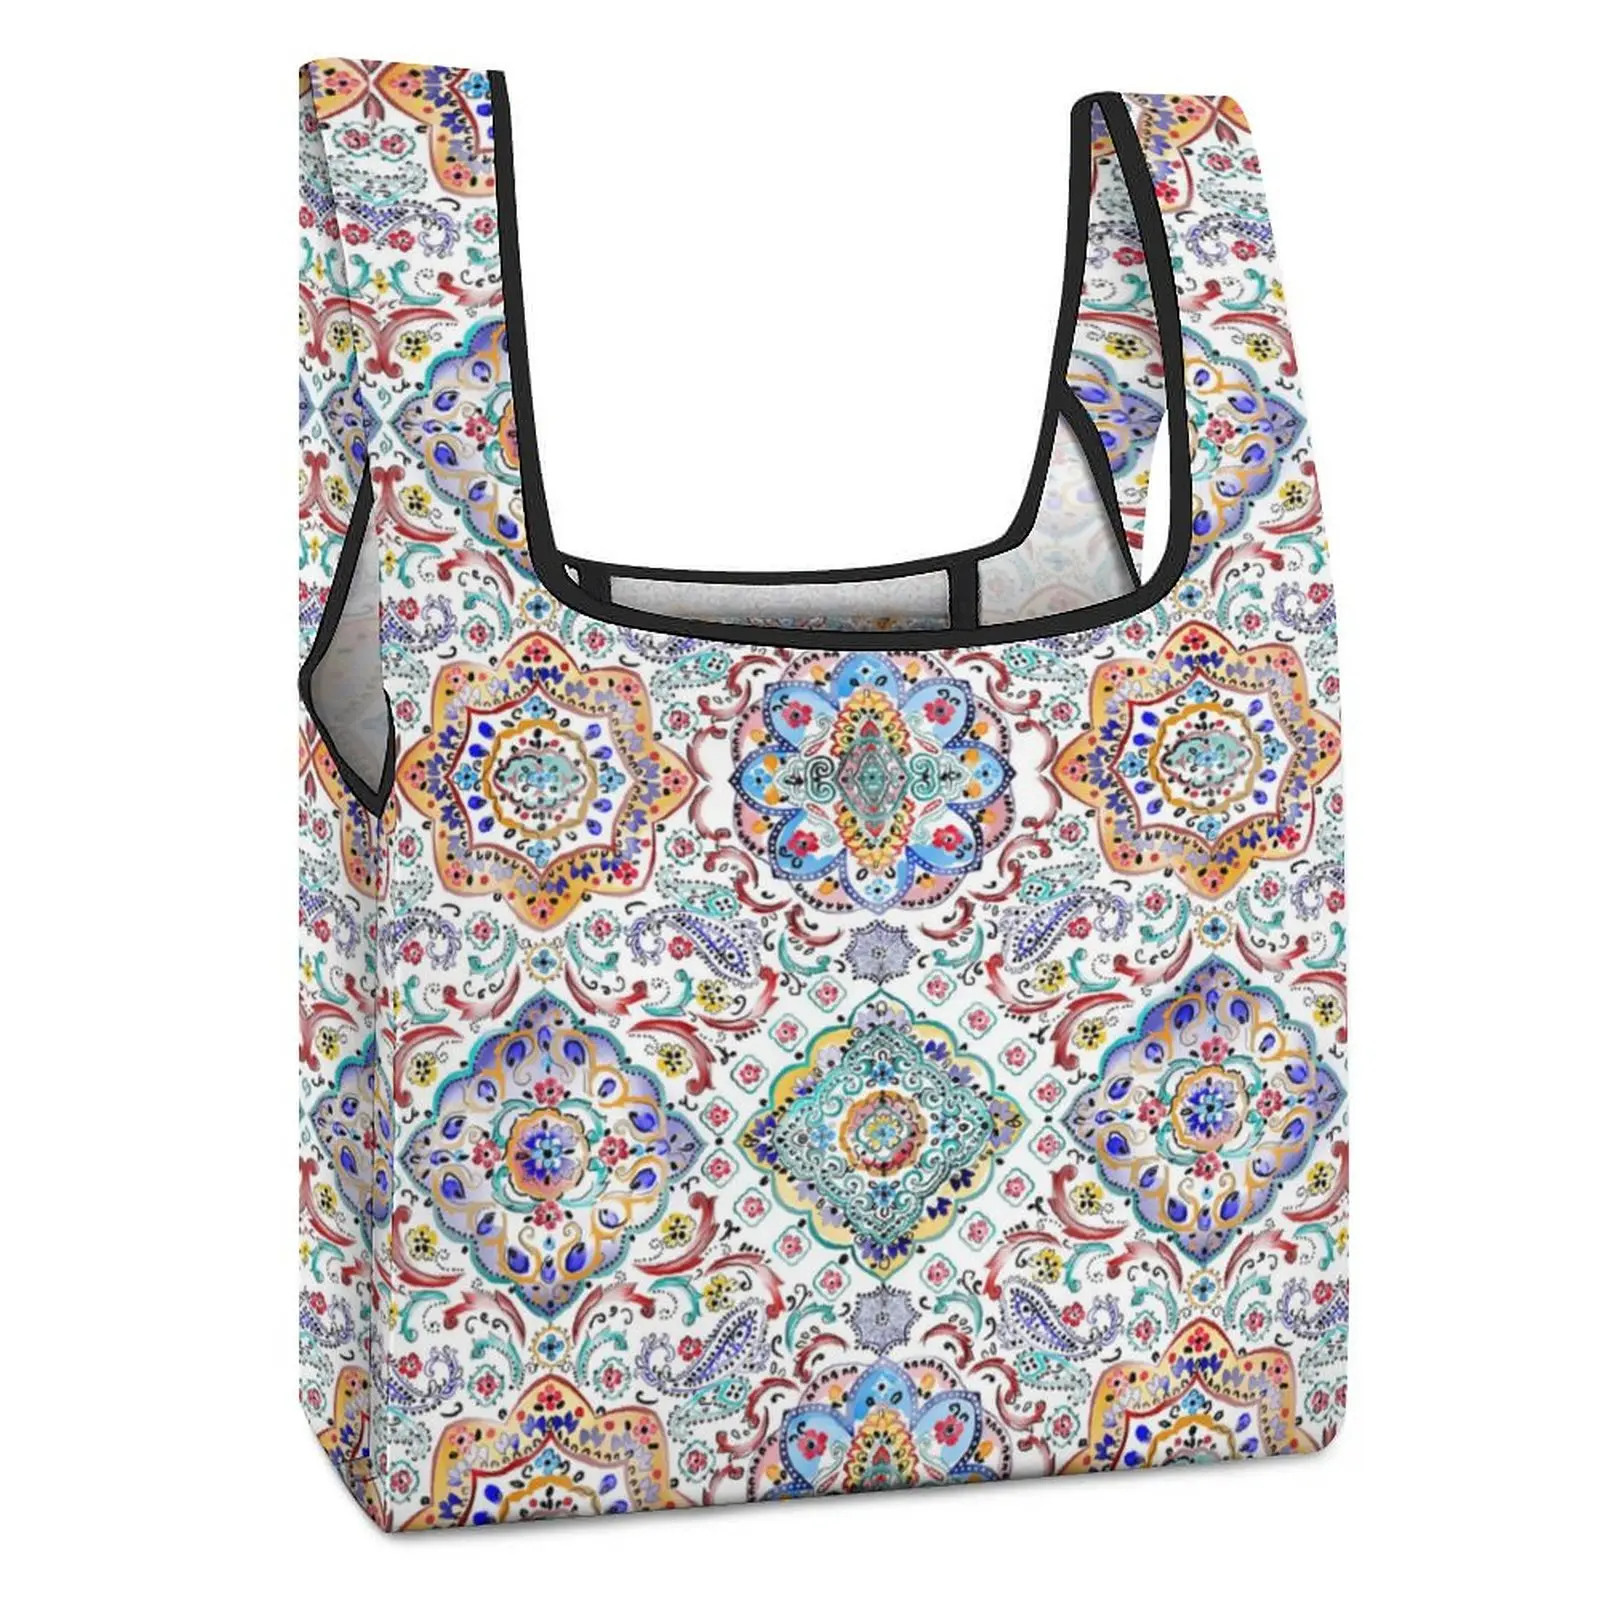 Customized Printed Bags Shopper Shoulder Bag Exotic Ethnic Style Shopping Tote Casual Woman Bags with Handles Custom Pattern